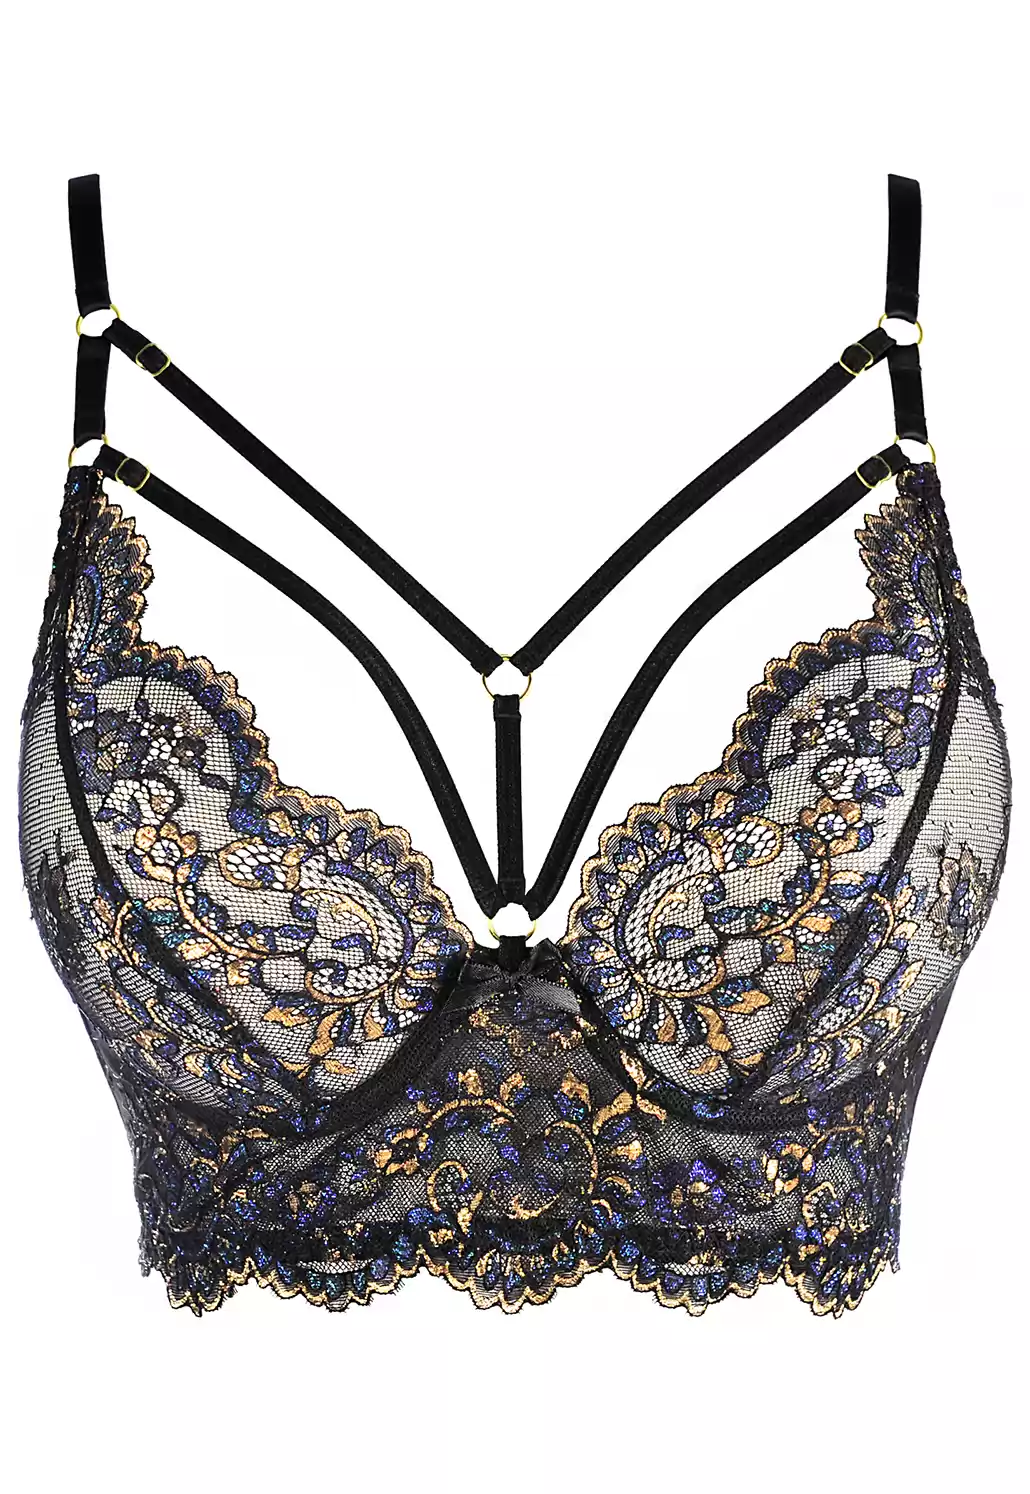 Blue and gold lace bustier bra